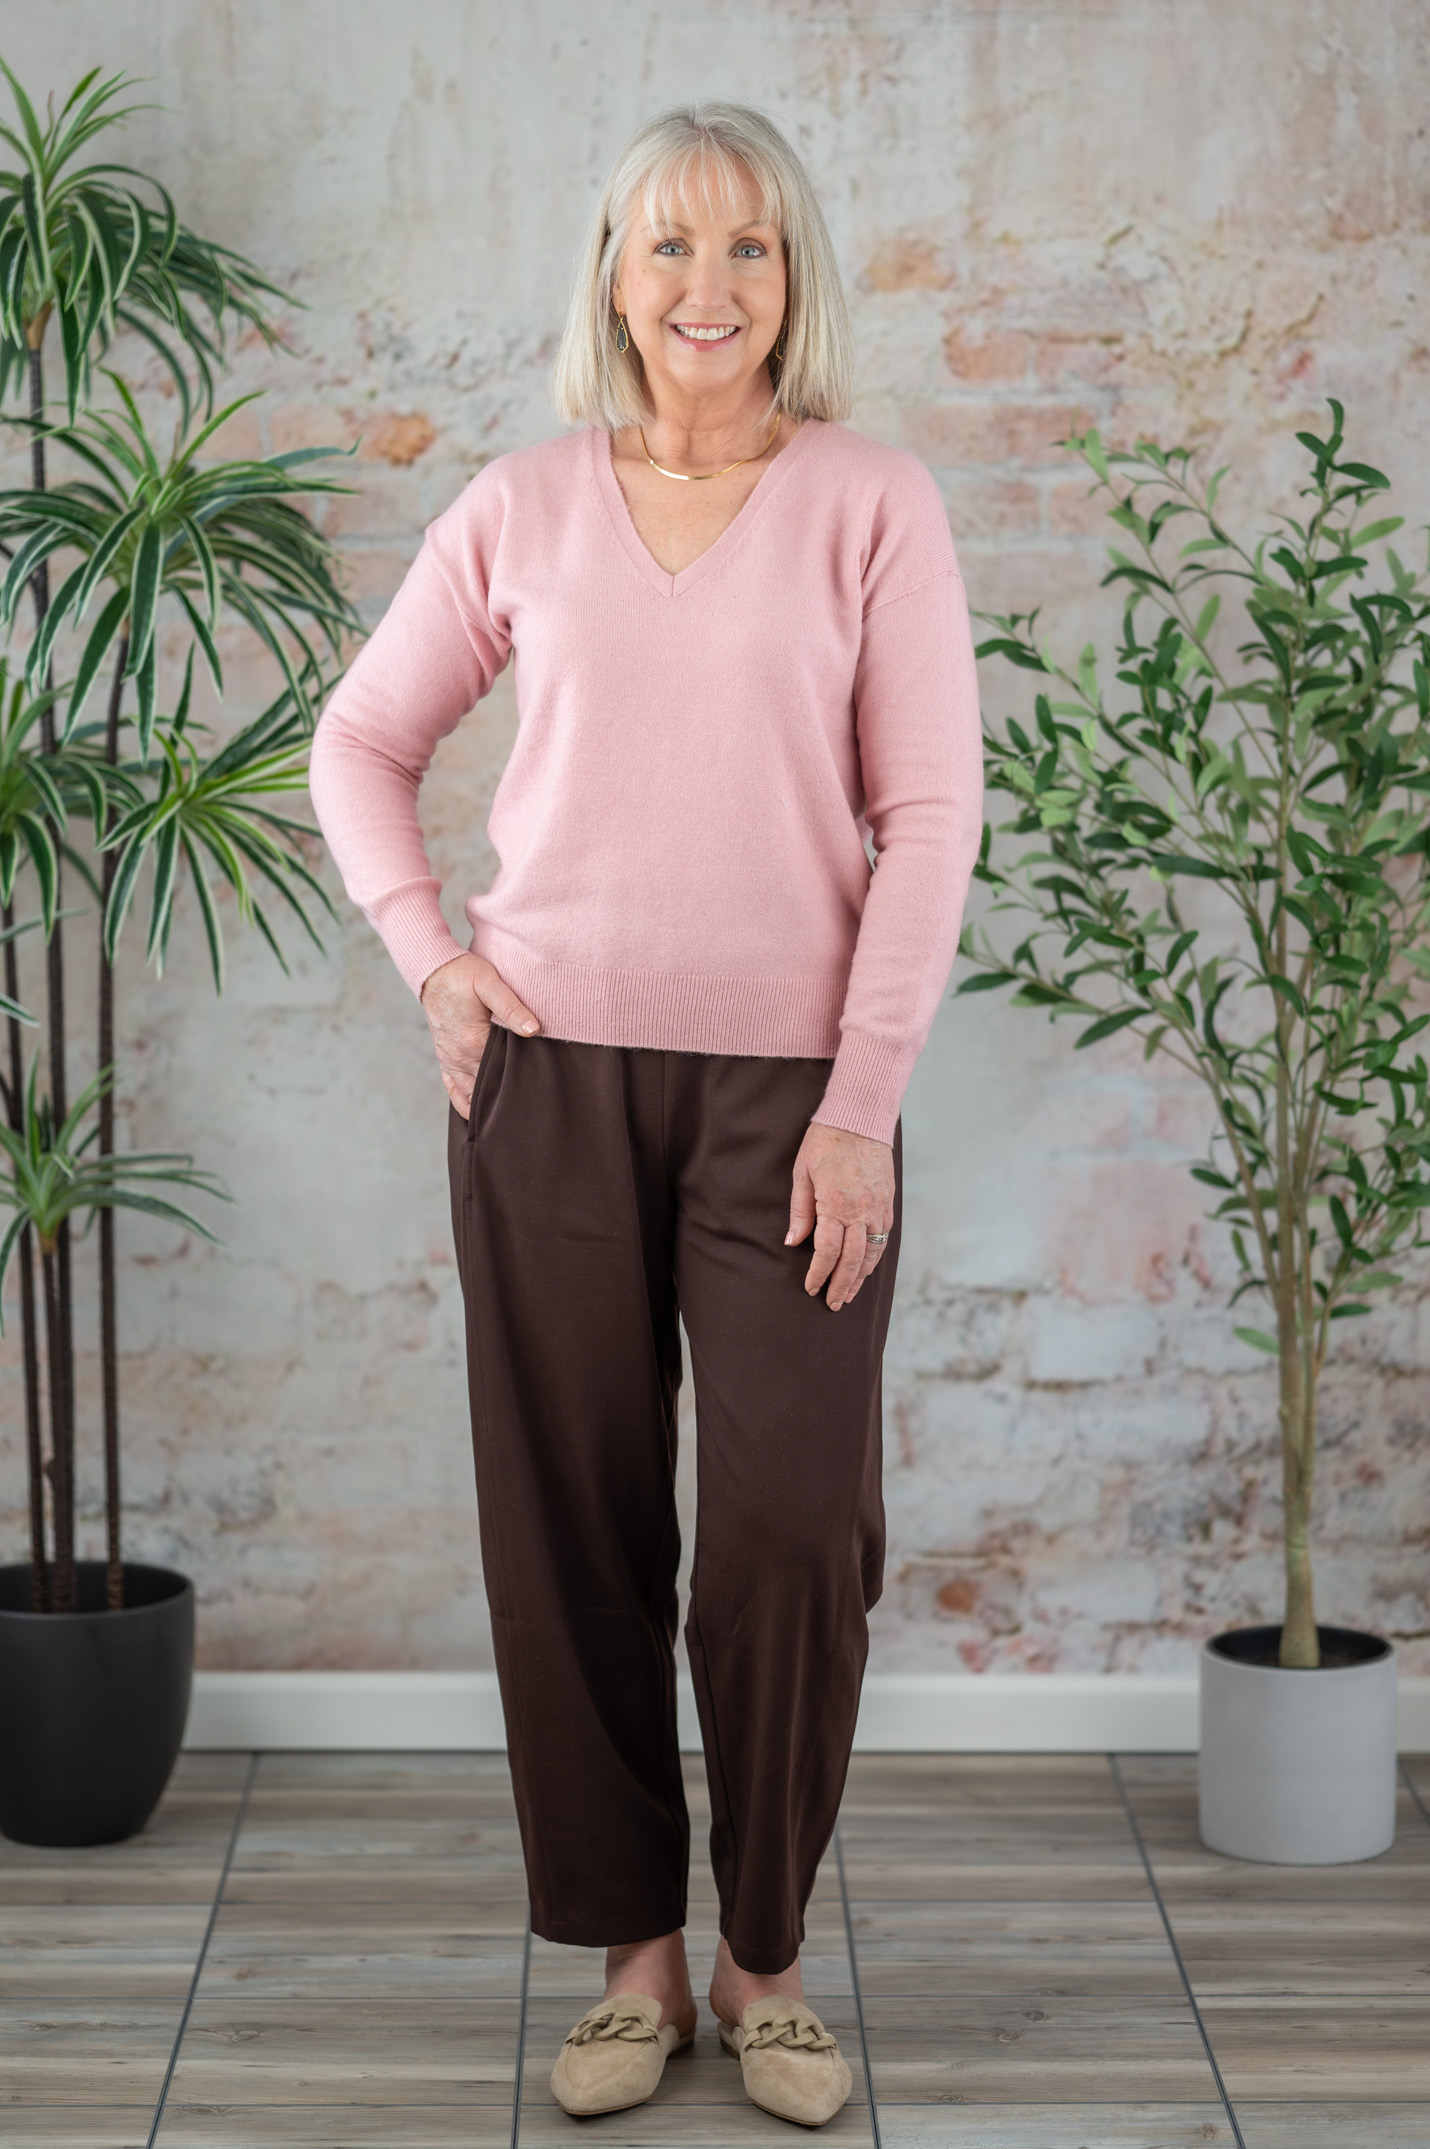 Eileen Fisher pants and Nordstrom cashmere sweater